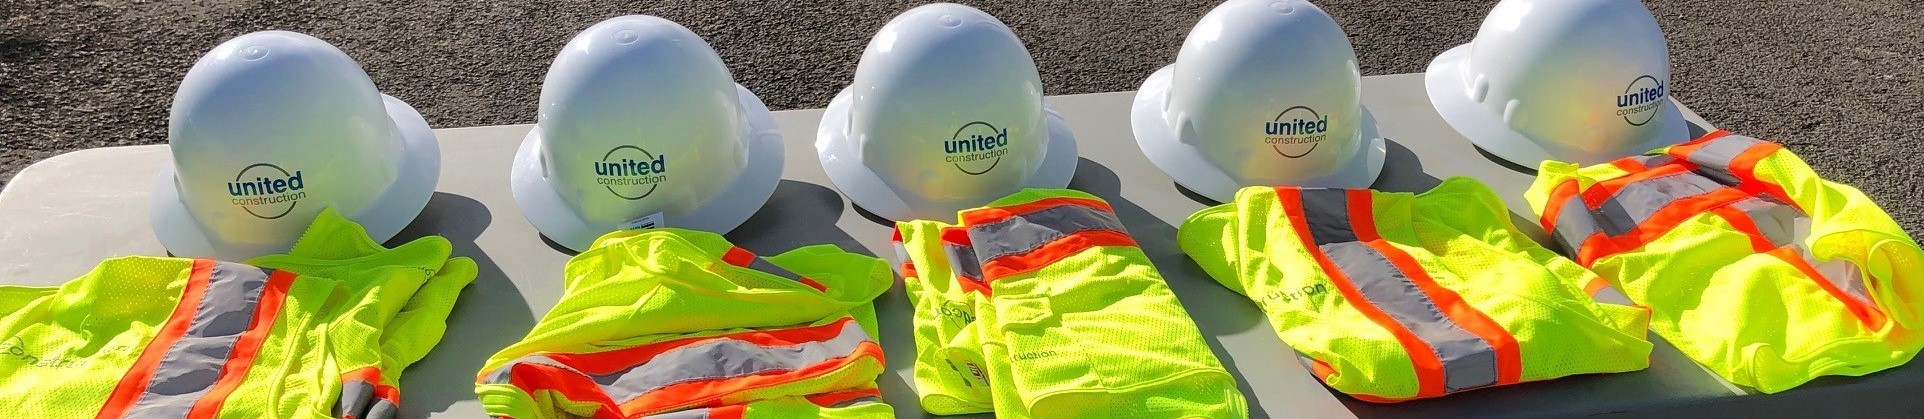 United Construction on display at Reno Ice - United Construction